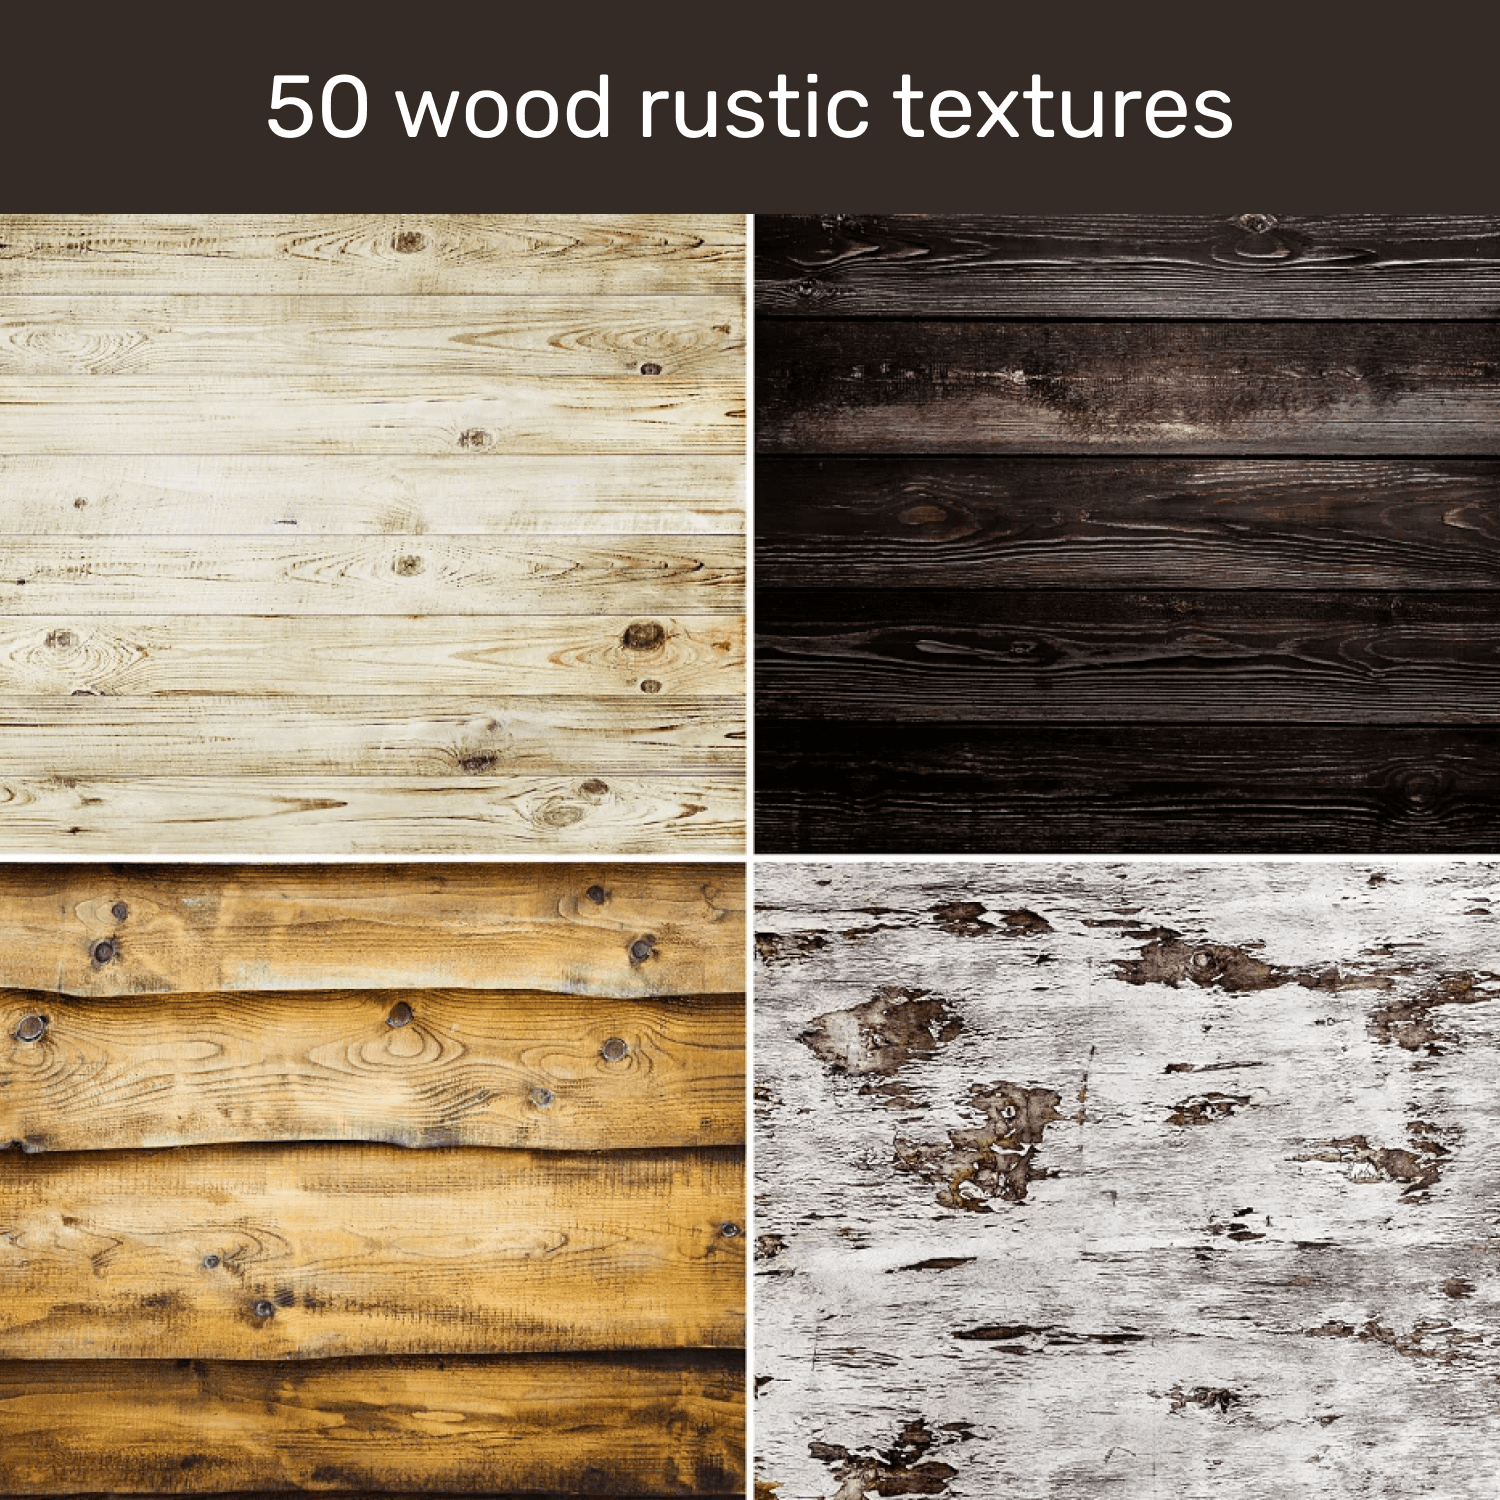 50 wood rustic textures cover.